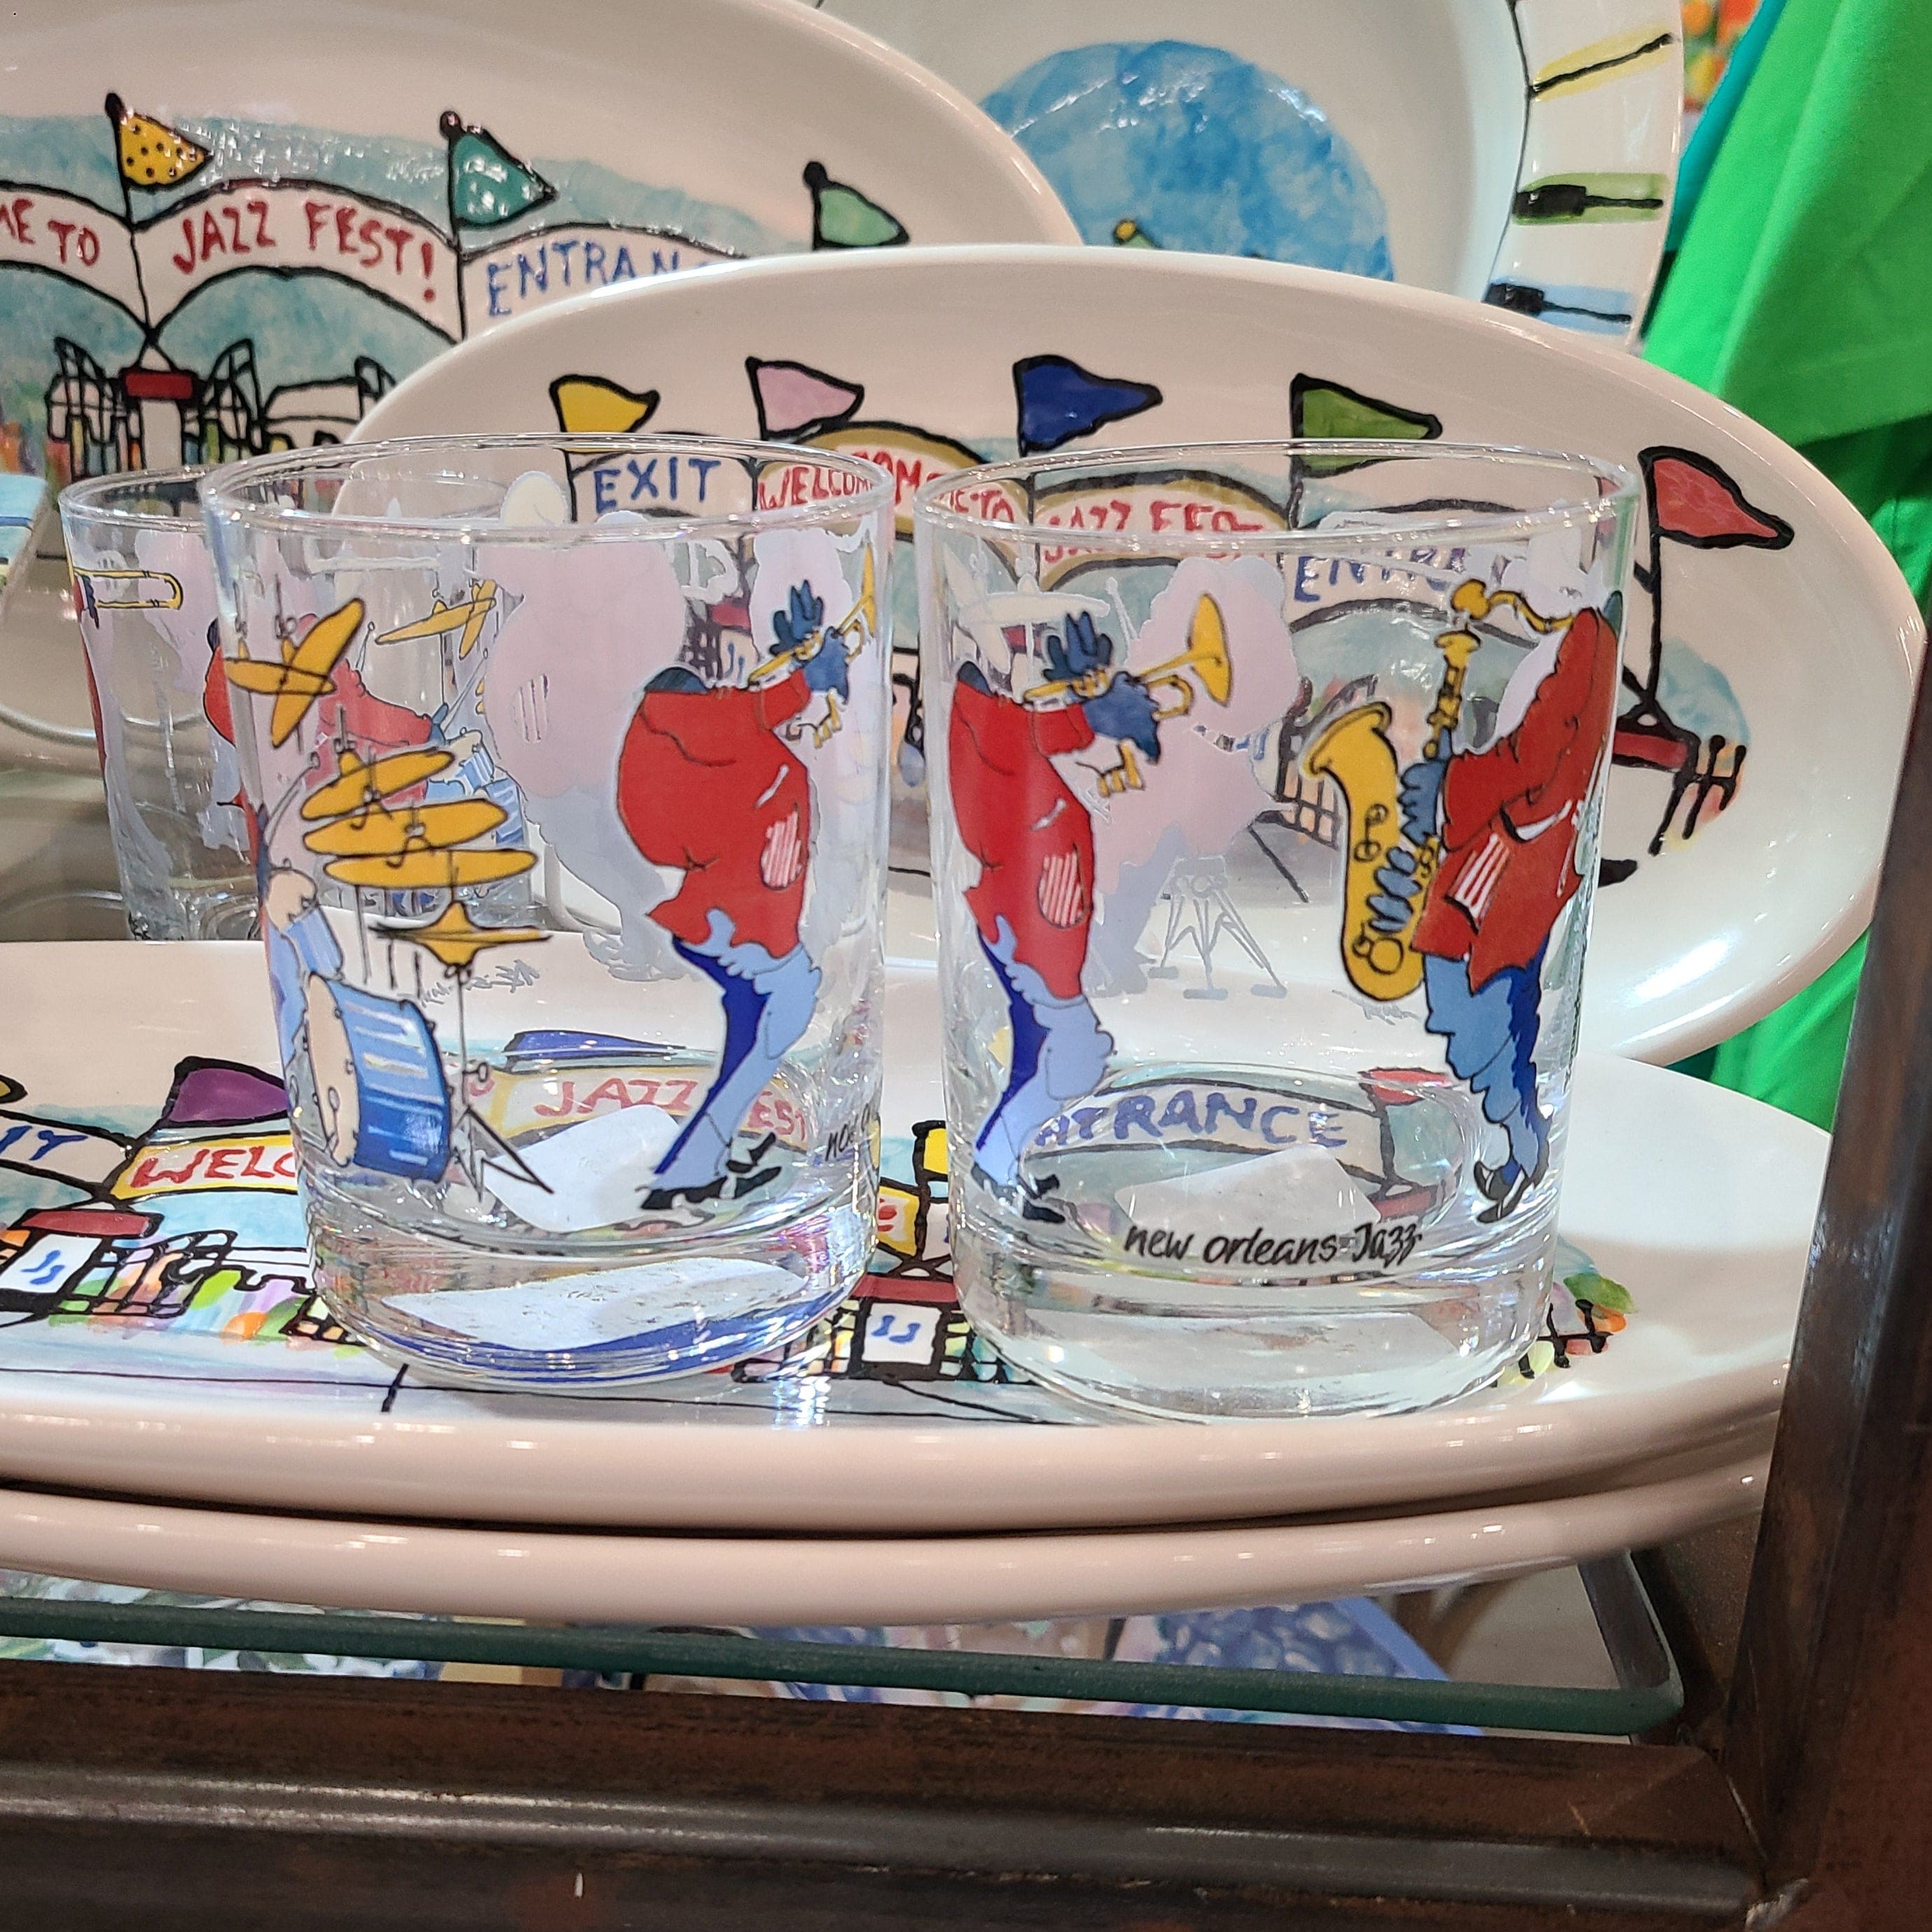 Youngberg & Co Inc Youngberg & Co Inc DOF New Orleans Jazz Glasses - Little Miss Muffin Children & Home